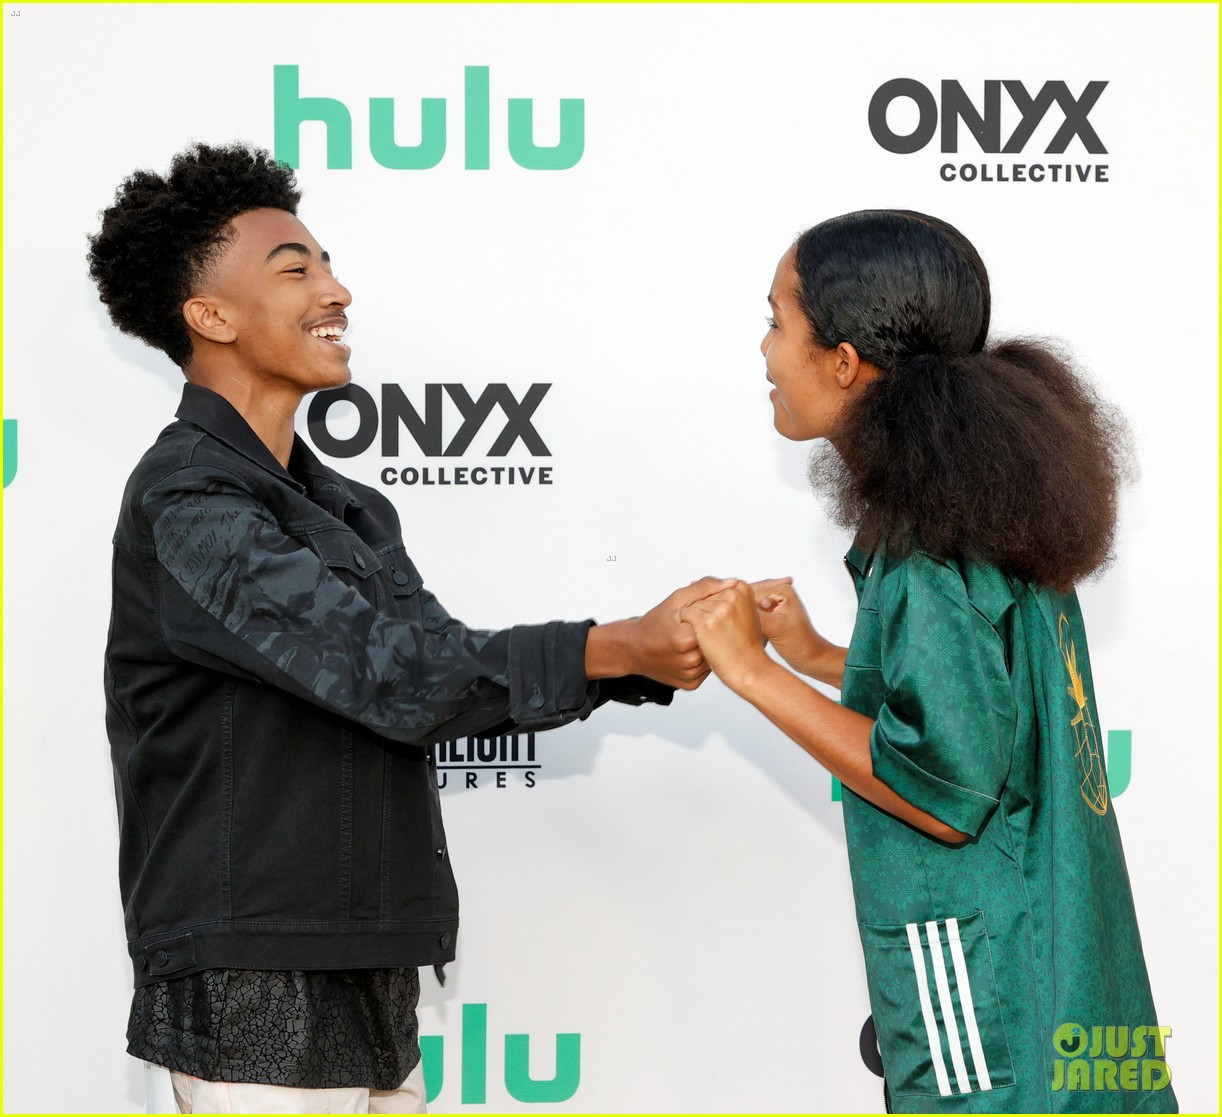 yara shahidi reunites with her little bro miles brown at summer of soul event 13